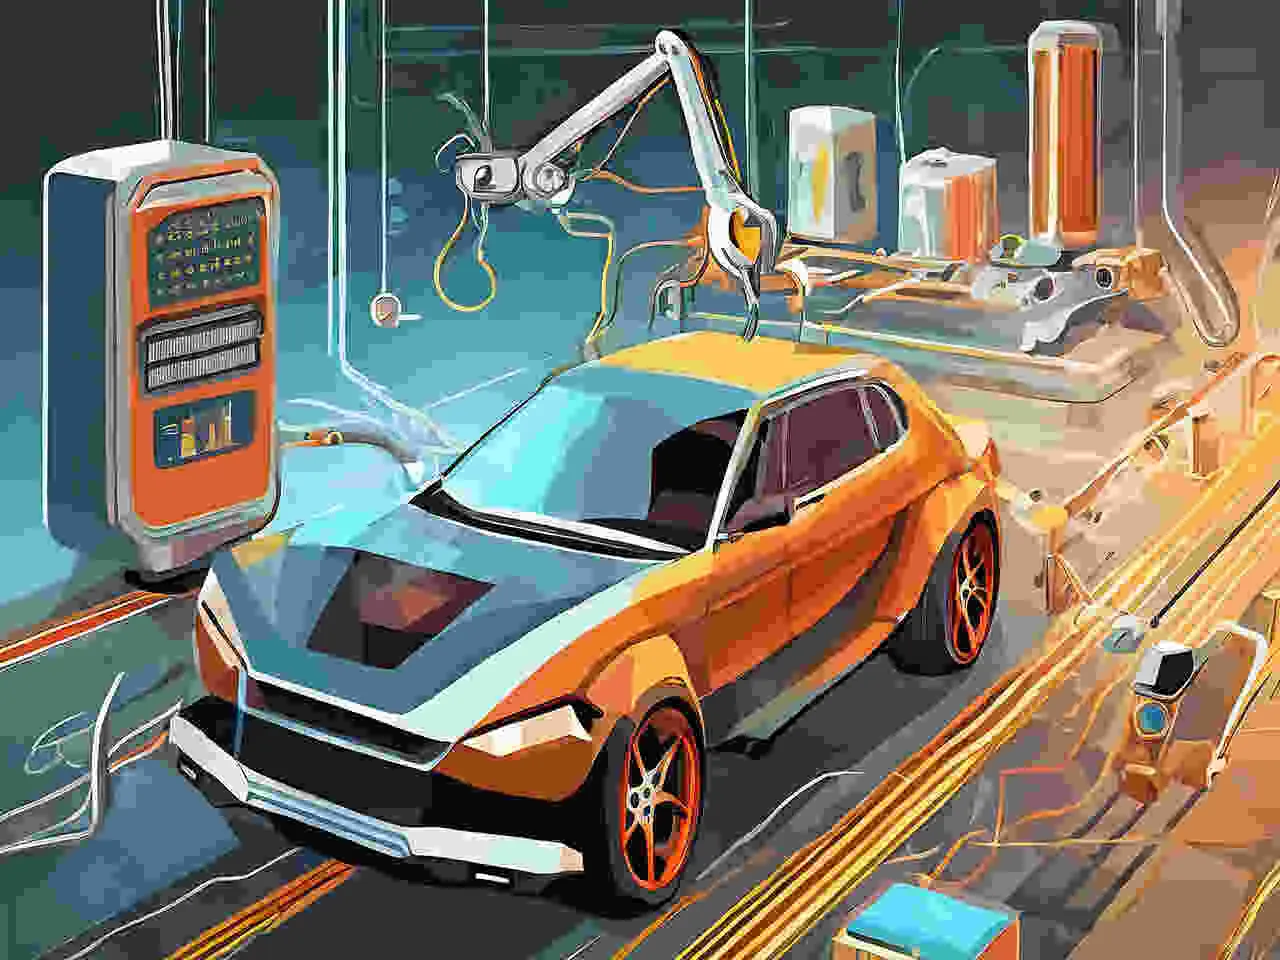 How automotive electronics is responding to the evolving market needs